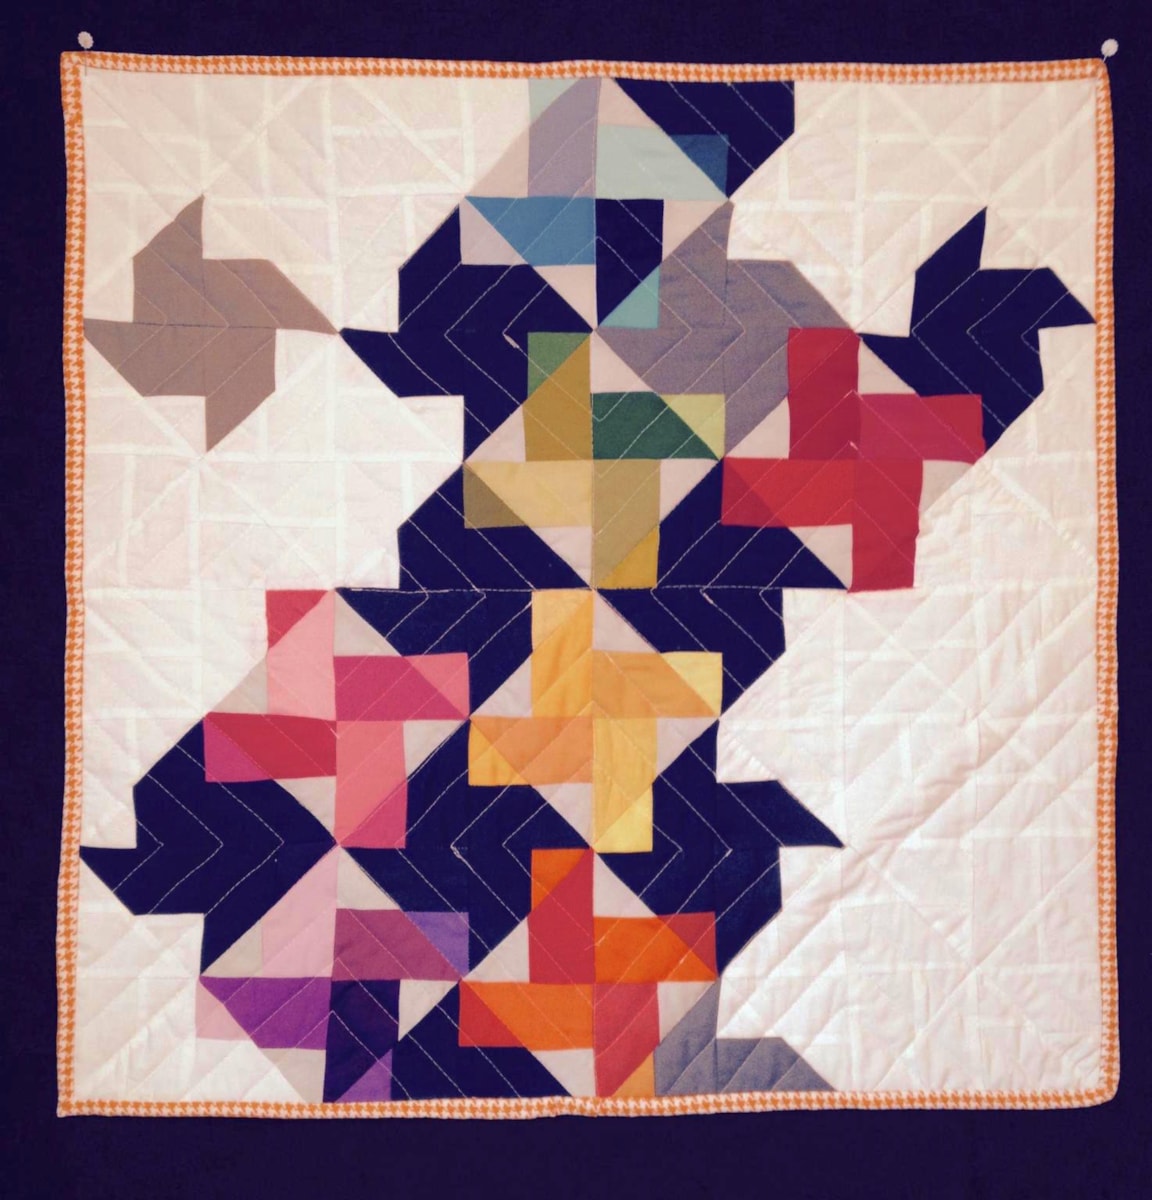 By Jill Kofton. I made verston #2, Scrappier 25.5" x 25.5." My past two quilts have used only solids. So, I had a large variety of scraps to choose from. I wanted to do a play off the pinwheel feel while adding a modern twist. This I carried over to the quilt back where I did one page pinwheel in warm and color colors as a single large block on back (not pictured. The piece was bound with an orange/white houndstooth.